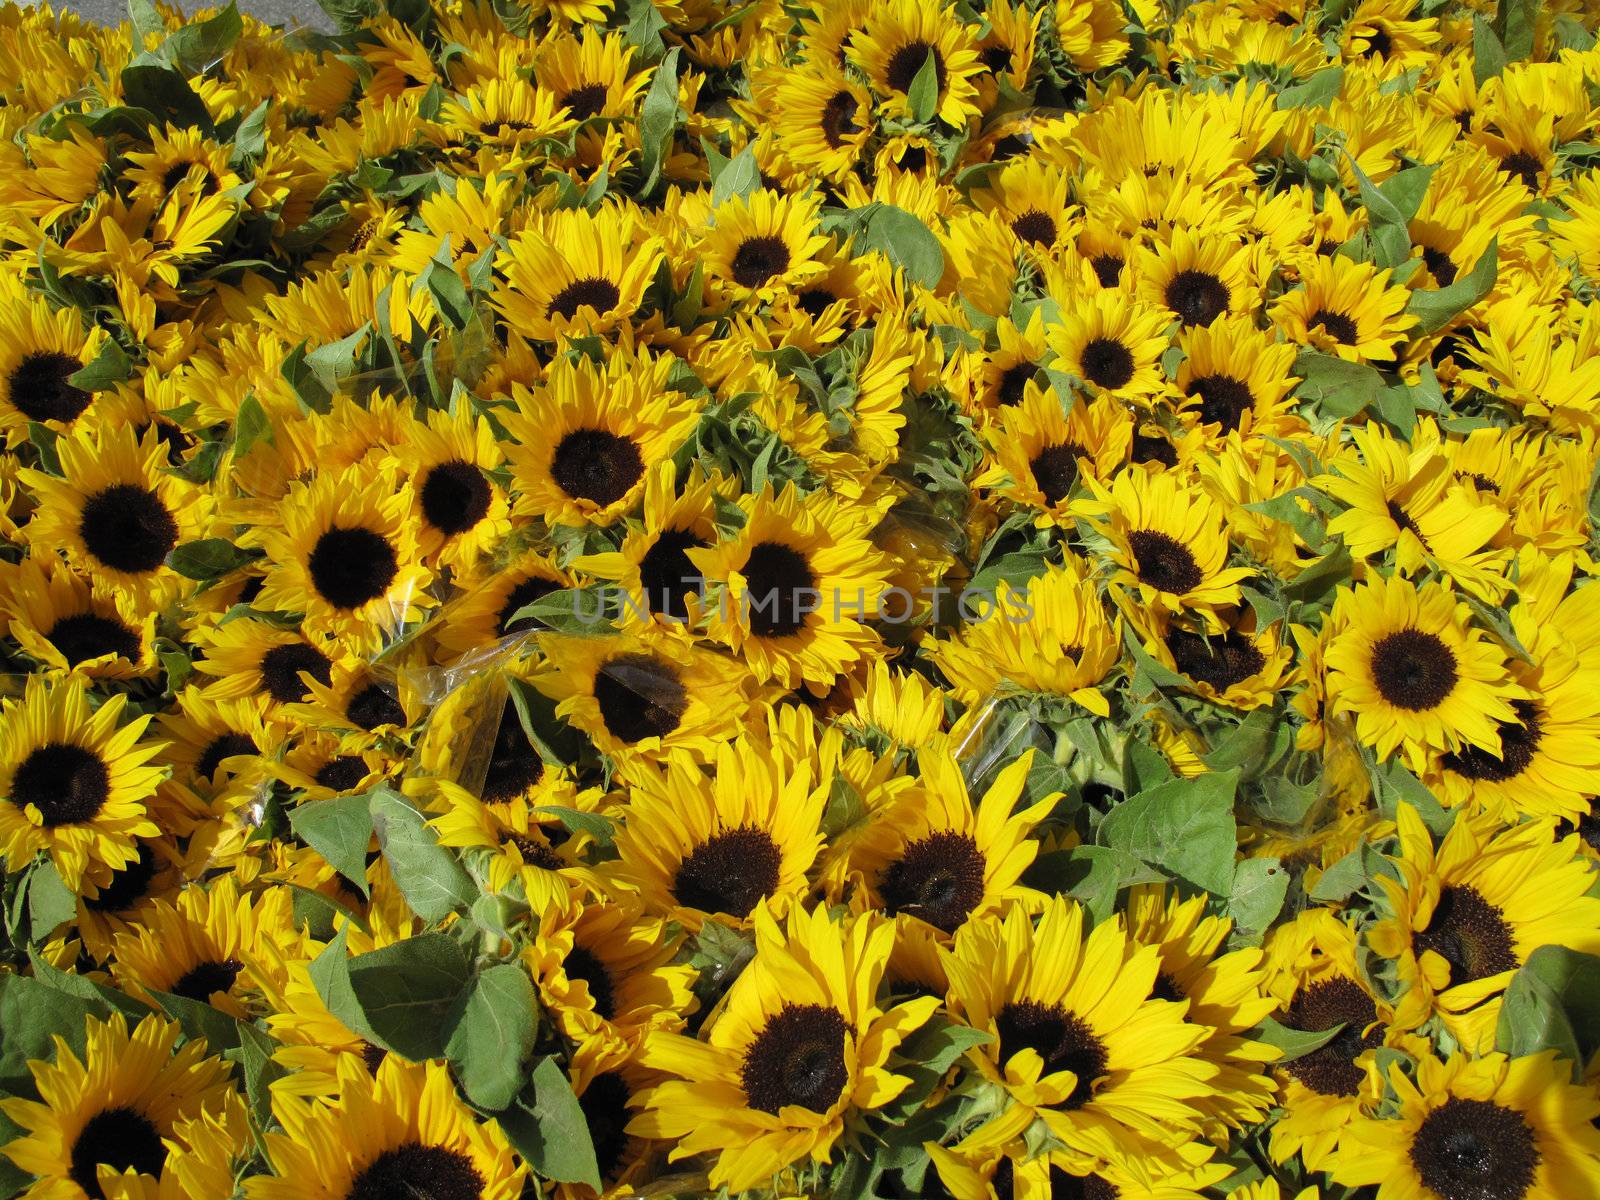 Bunches of sunflowers for sale - Denmark.